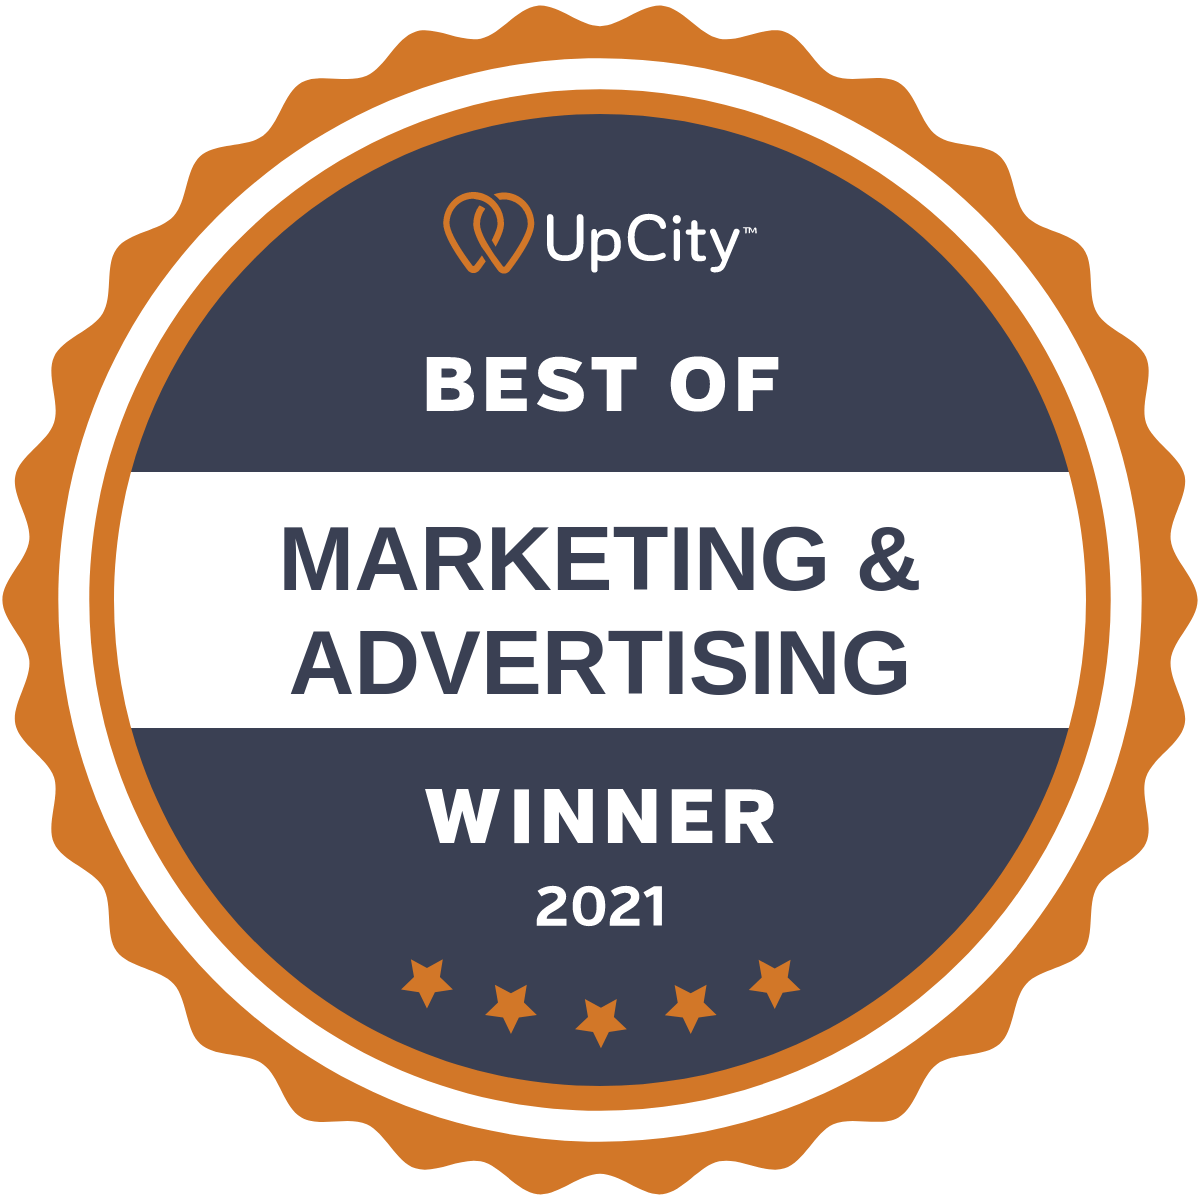 Best of Marketing & Advertising Winner 2021 UpCity - Ace SEO Consulting